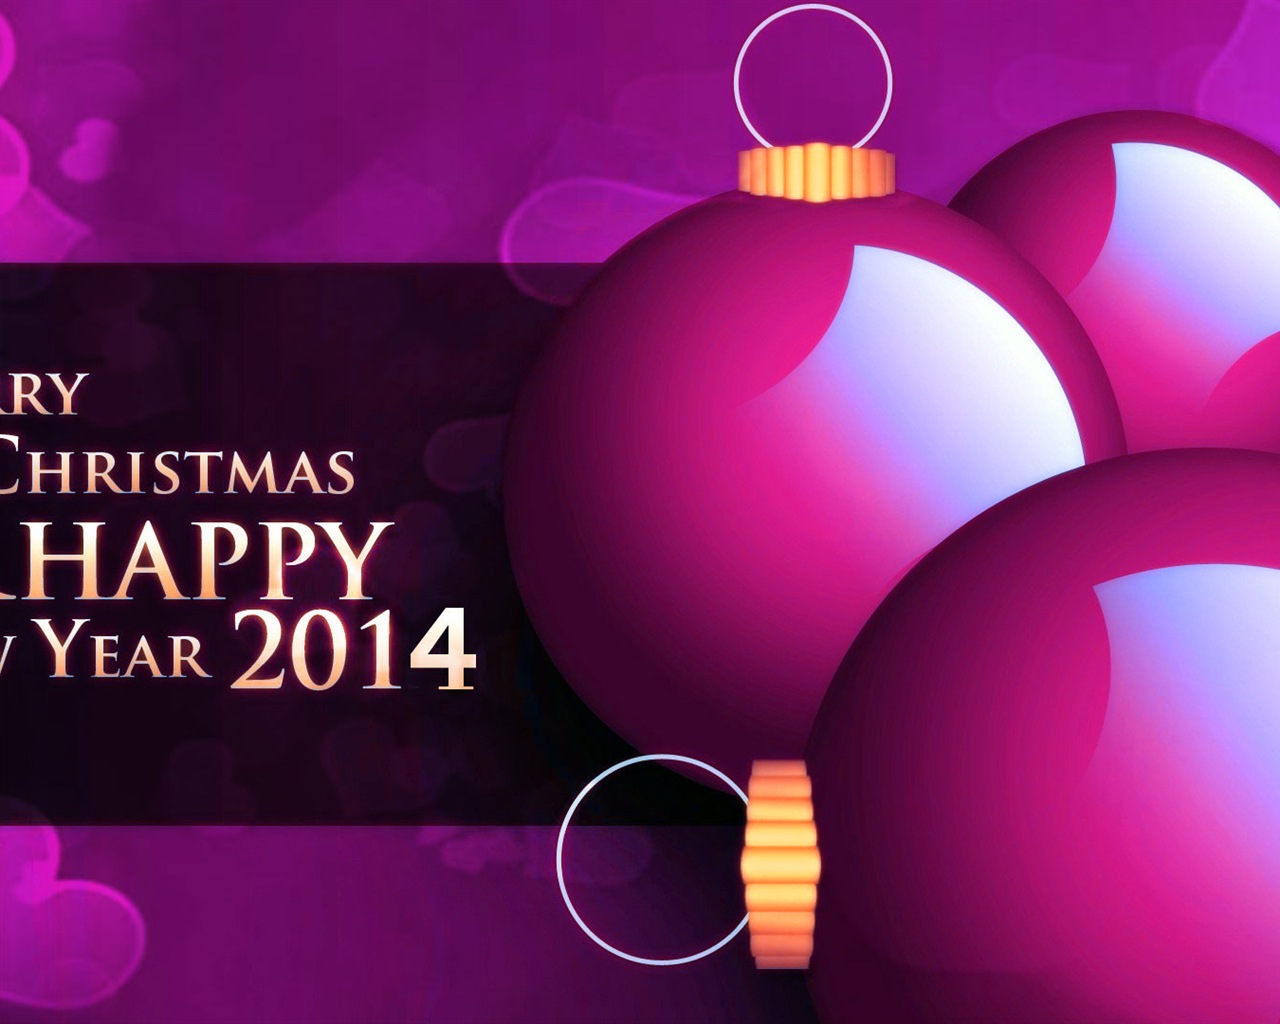 2014 New Year Theme HD Wallpapers (2) #18 - 1280x1024